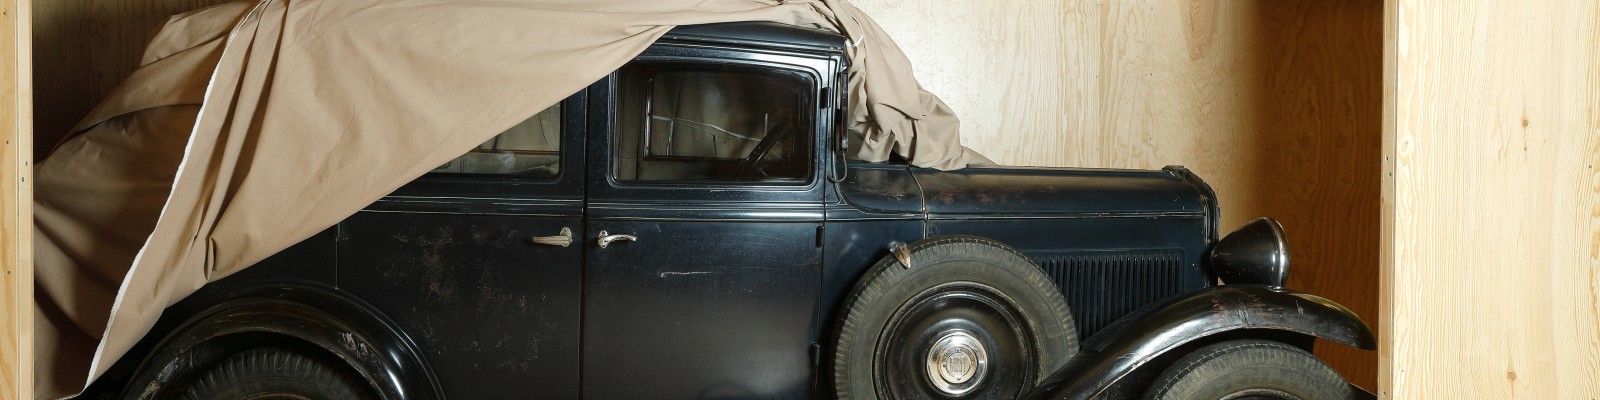 Fiat 522 C (former owner: Rosa Glückselig) in the exhibition "Inventory number 1938"